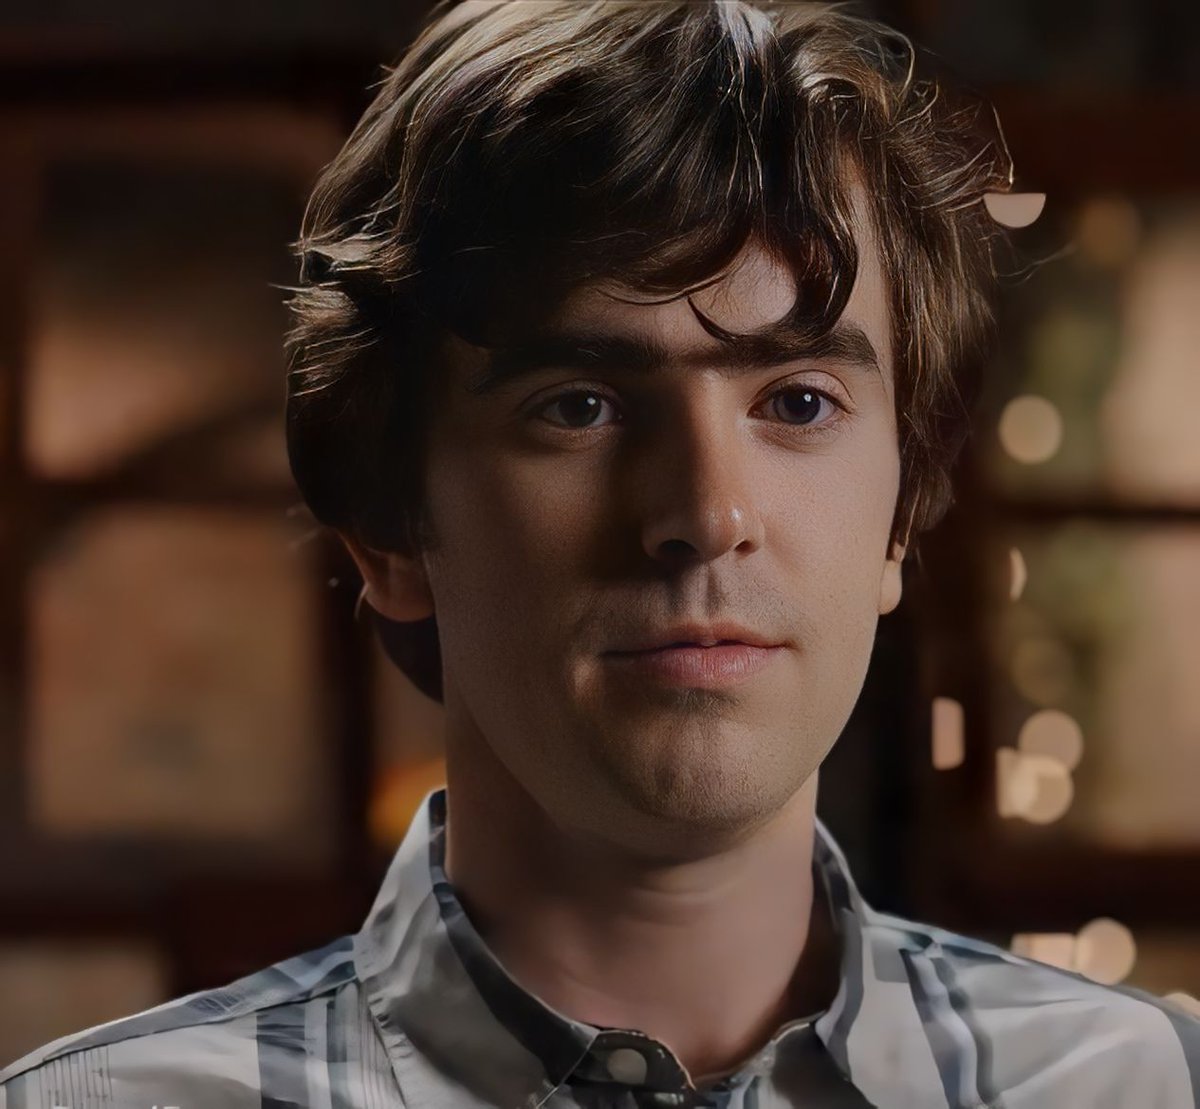 Having to wait another week for a new episode 🥞🍏💖💙 #FreddieHighmore #DrDimples #DrShaunMurphy #TheGoodDoctor #SaveTheGoodDoctor @freddiehighmore @GoodDoctorABC @SPTV @ABCSignature @ABCNetwork #SaveTheGoodDoctor petition link in bio